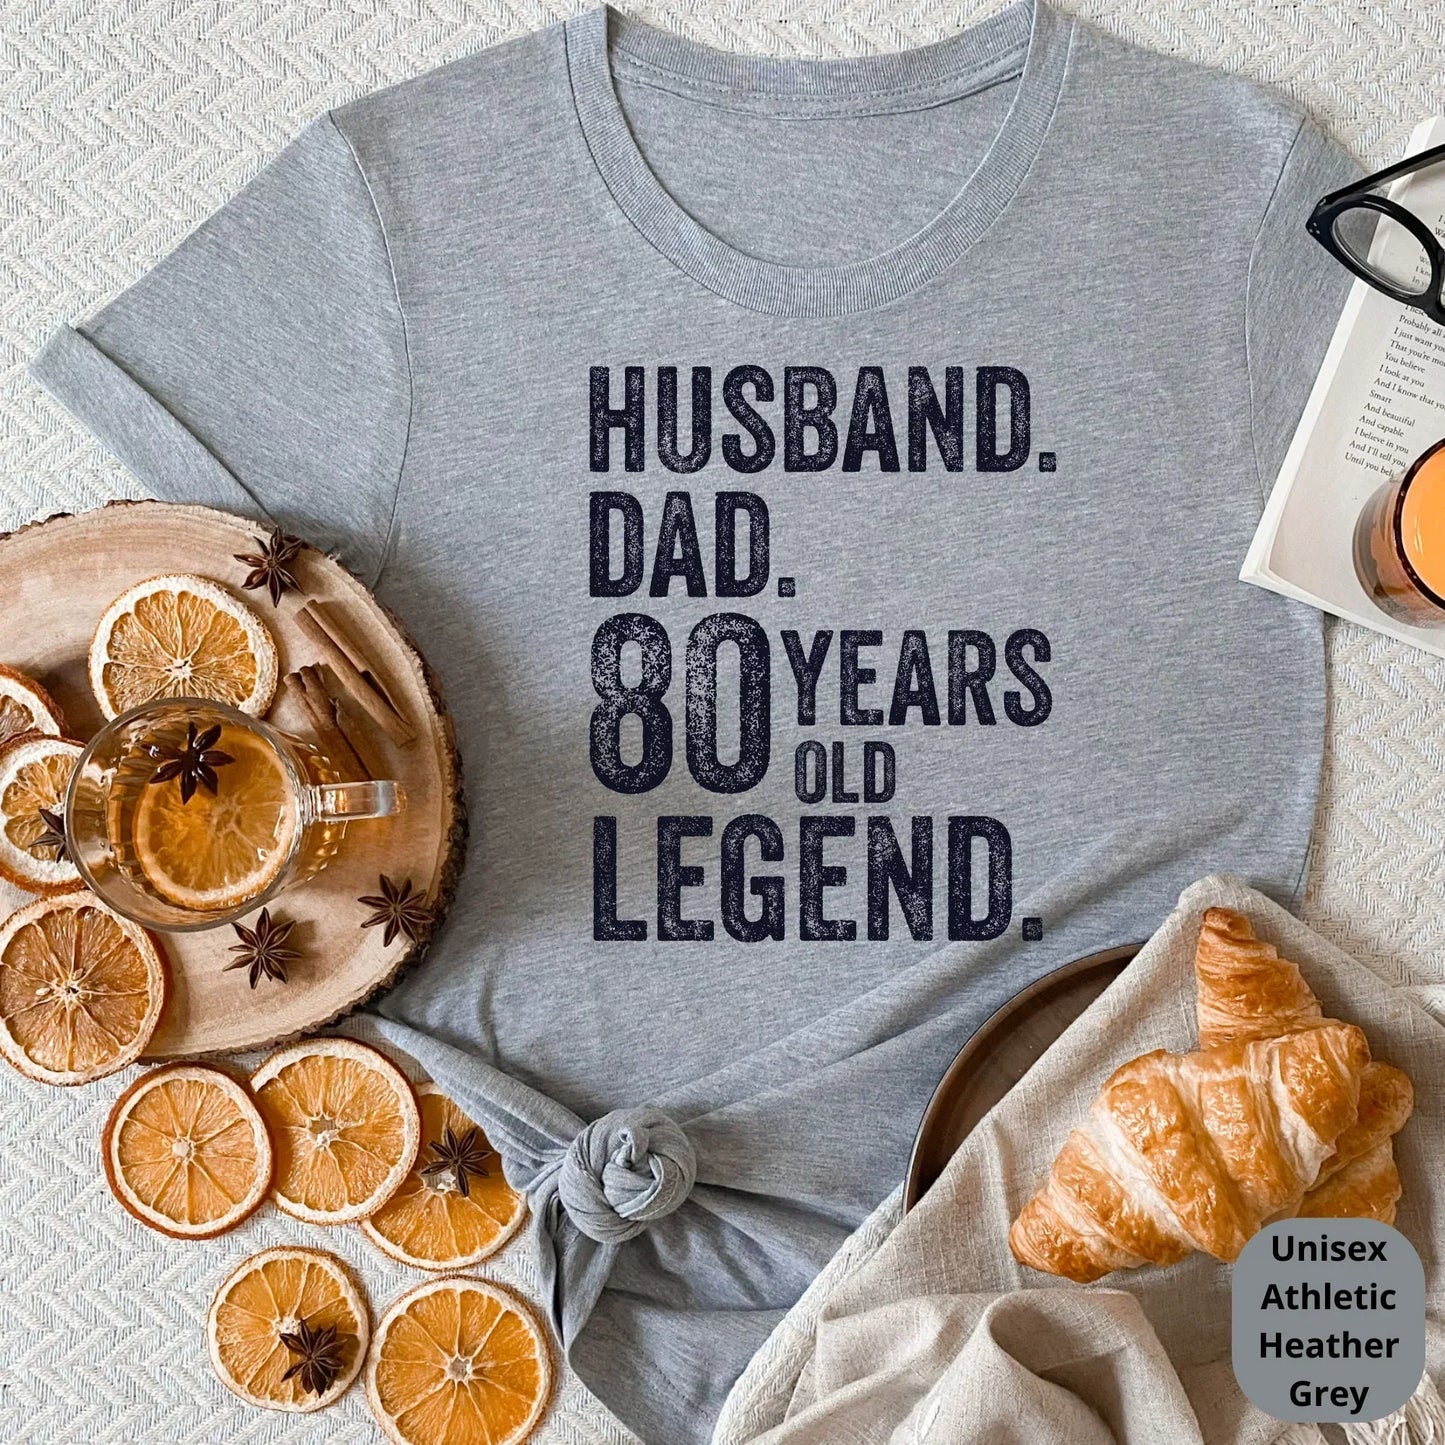 Husband, Dad, 80 Year Old Legend, Celebrate a Lifetime of Memories with Our Customizable 80th Birthday Shirt HMDesignStudioUS